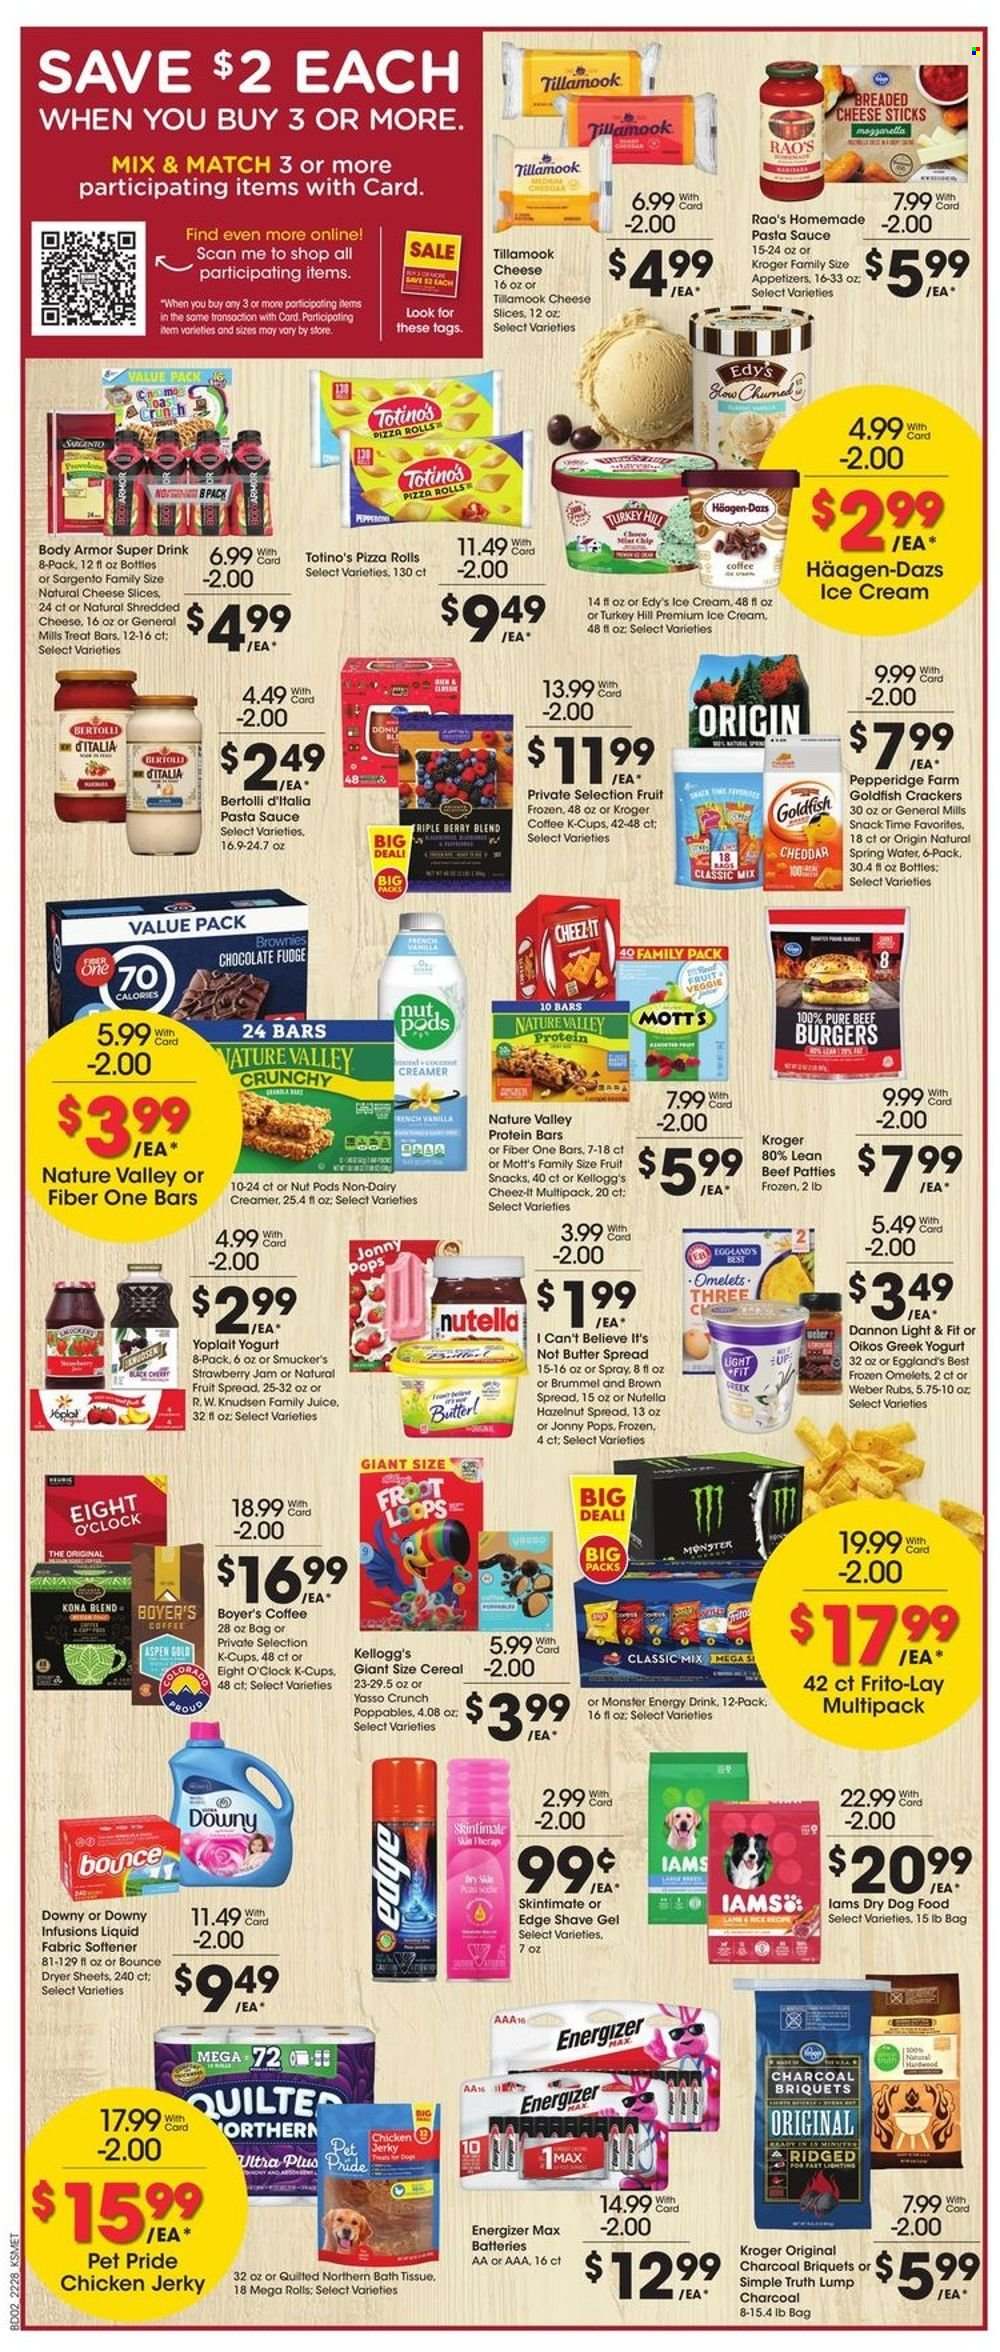 thumbnail - King Soopers Flyer - 08/10/2022 - 08/16/2022 - Sales products - pizza rolls, brownies, Mott's, pizza, pasta sauce, hamburger, sauce, beef burger, Bertolli, jerky, shredded cheese, sliced cheese, Sargento, greek yoghurt, yoghurt, Oikos, Yoplait, Dannon, butter, I Can't Believe It's Not Butter, non dairy creamer, creamer, ice cream, Häagen-Dazs, cheese sticks, fudge, Nutella, crackers, Kellogg's, fruit snack, Goldfish, Frito-Lay, Cheez-It, strawberry jam, cereals, protein bar, Nature Valley, Fiber One, fruit jam, hazelnut spread, juice, Body Armor, energy drink, Monster, Monster Energy, spring water, coffee, coffee capsules, K-Cups, Eight O'Clock, beef meat, bath tissue, Quilted Northern, fabric softener, Bounce, dryer sheets, Downy Laundry, shave gel, battery, Energizer, animal food, dry dog food, dog food, Iams, charcoal, Weber, briquettes. Page 2.